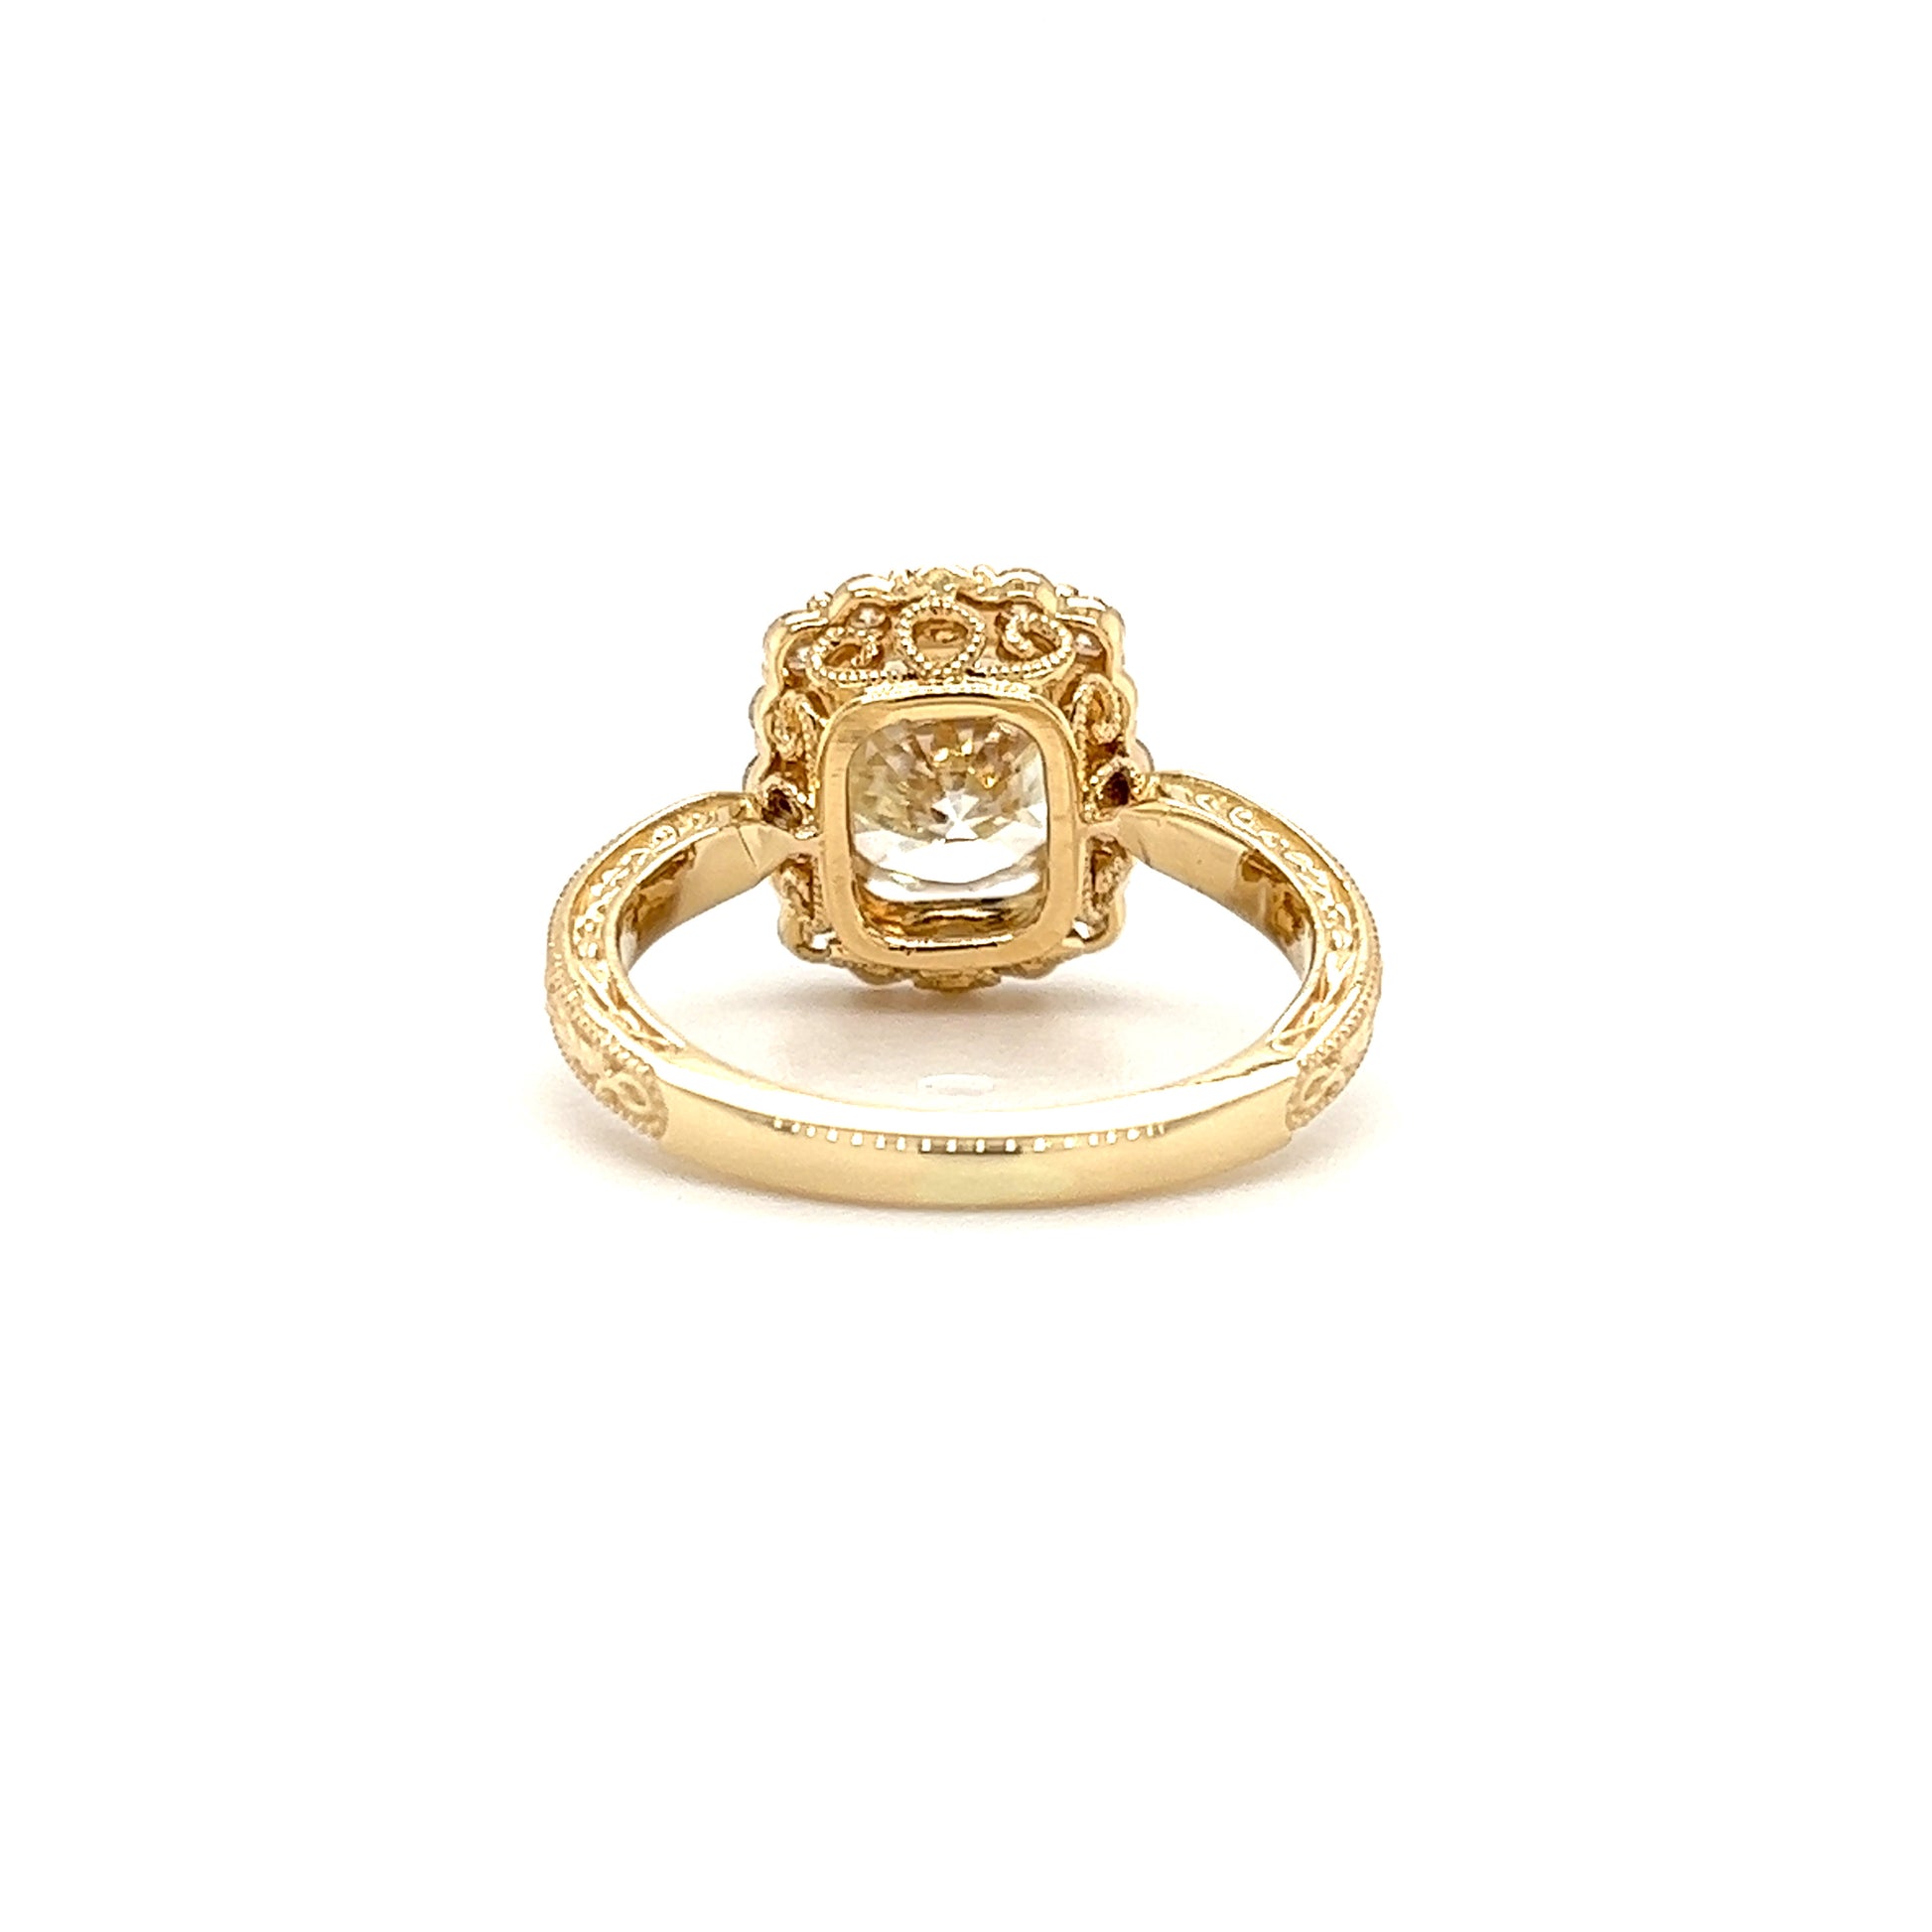 Round Diamond 2.68ct Ring with Diamond Halo in 18K and 14K Yellow Gold Back View